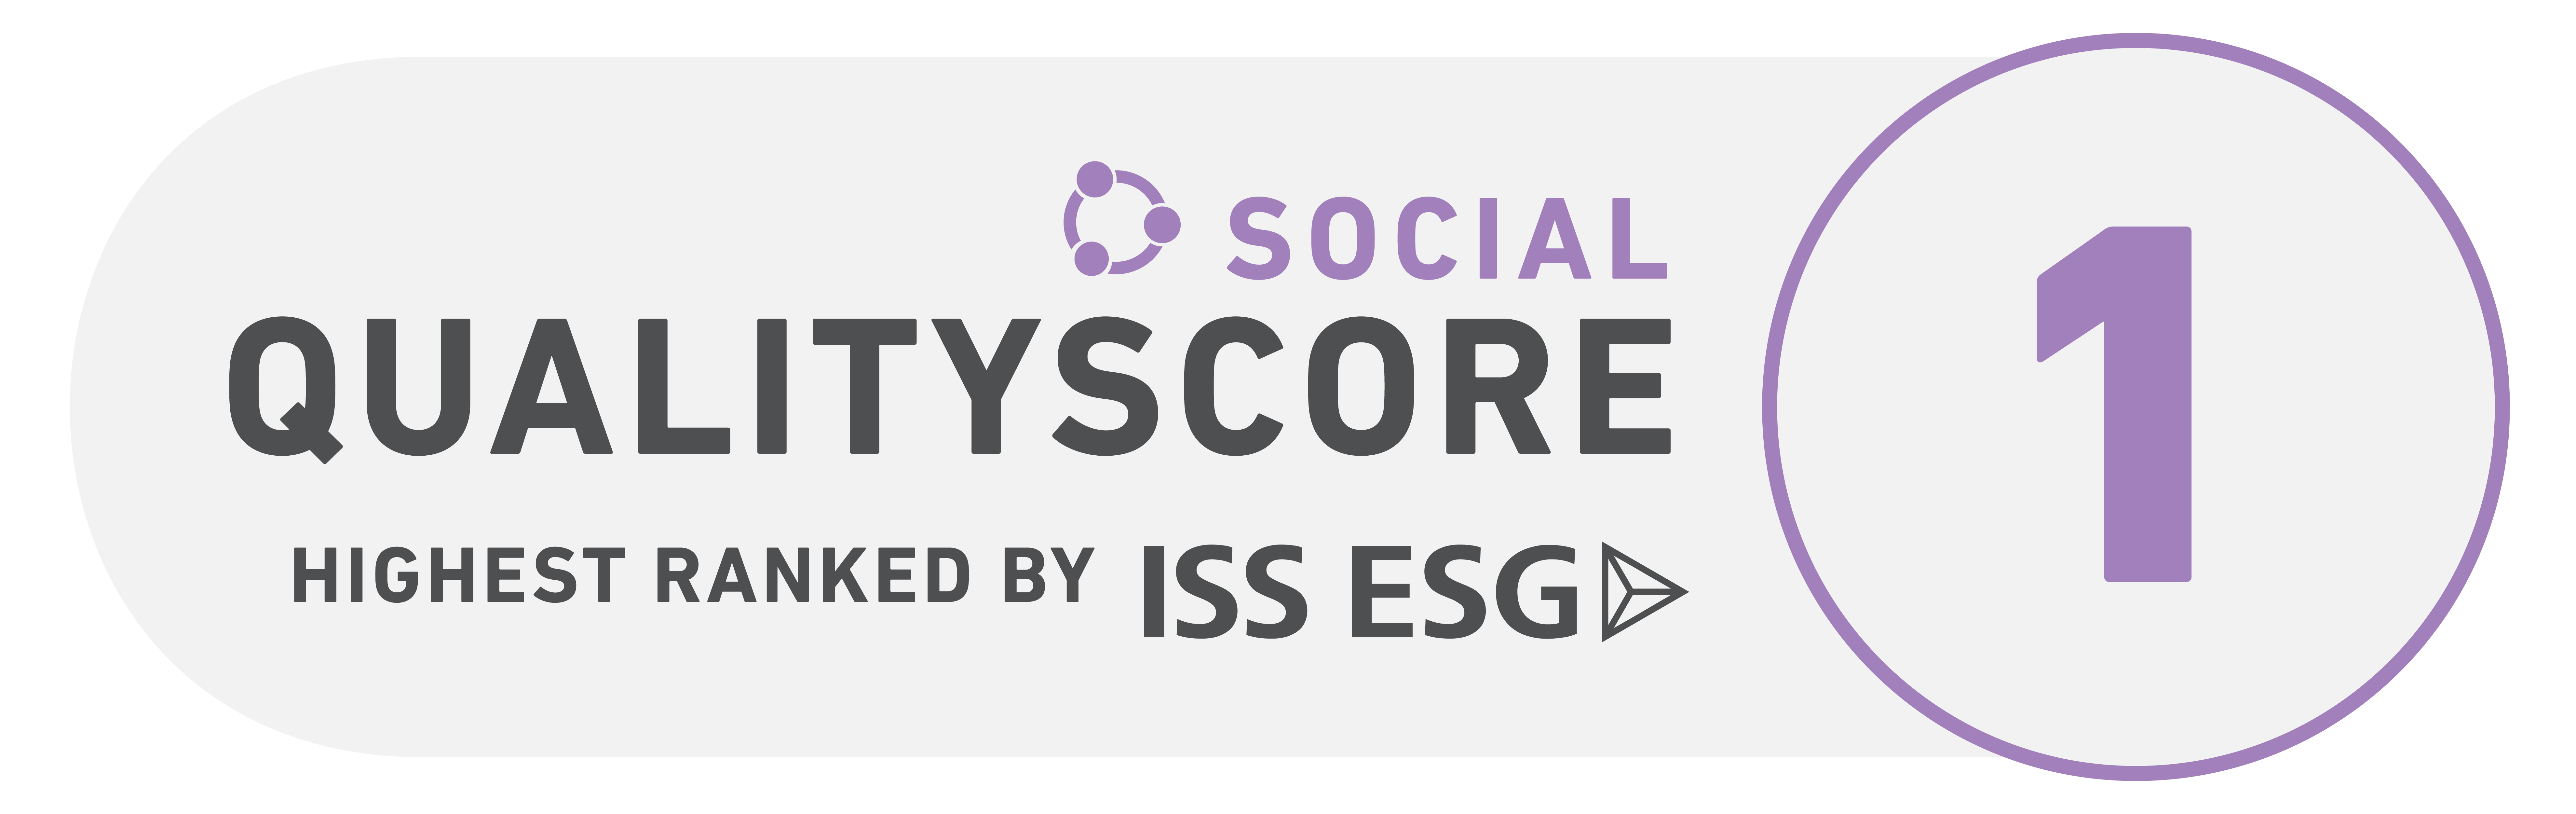 ISS QualityScore Badge_Social.png